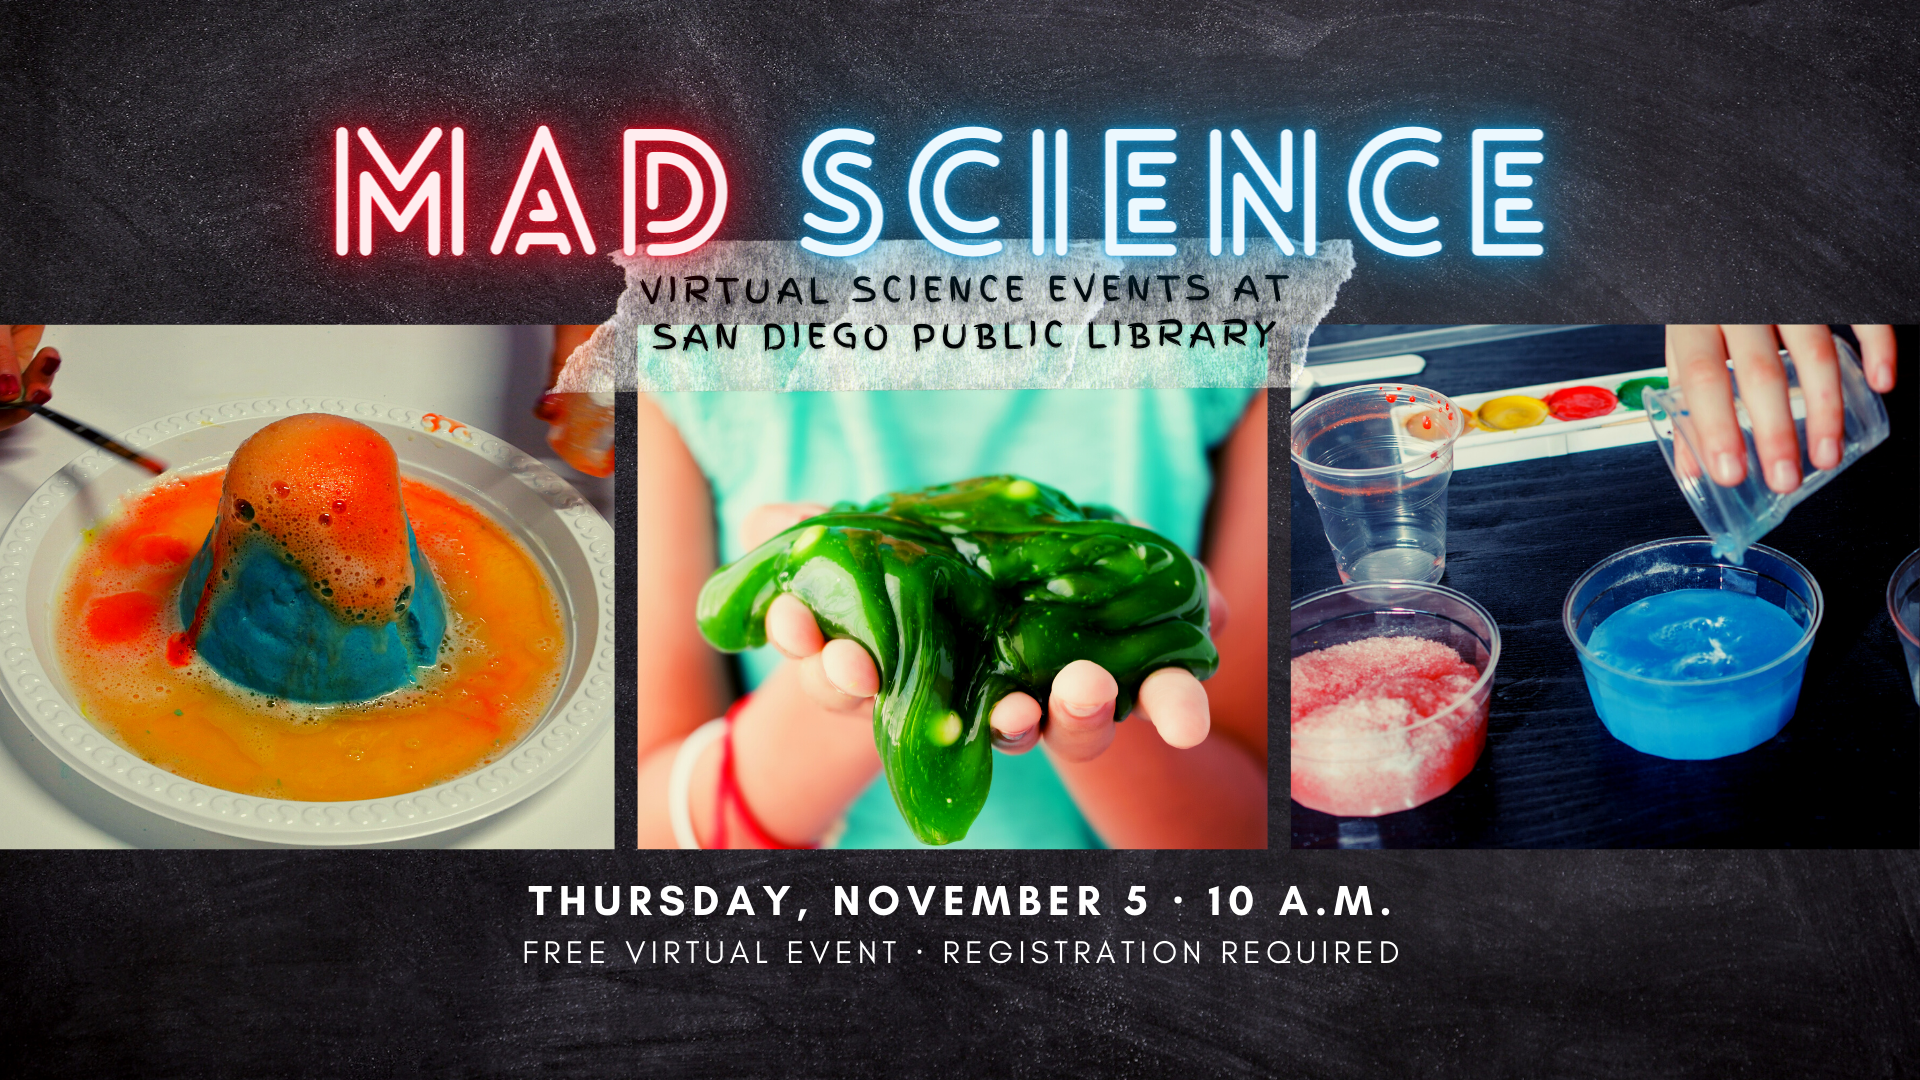 Mad Science Virtual Science Events at San Diego Public Library. Image of three science experiments (volcano, slime, mixing compounds). Upcoming program Thursday, November 5 at 10 a.m. Free Virtual Event, Registration Required.